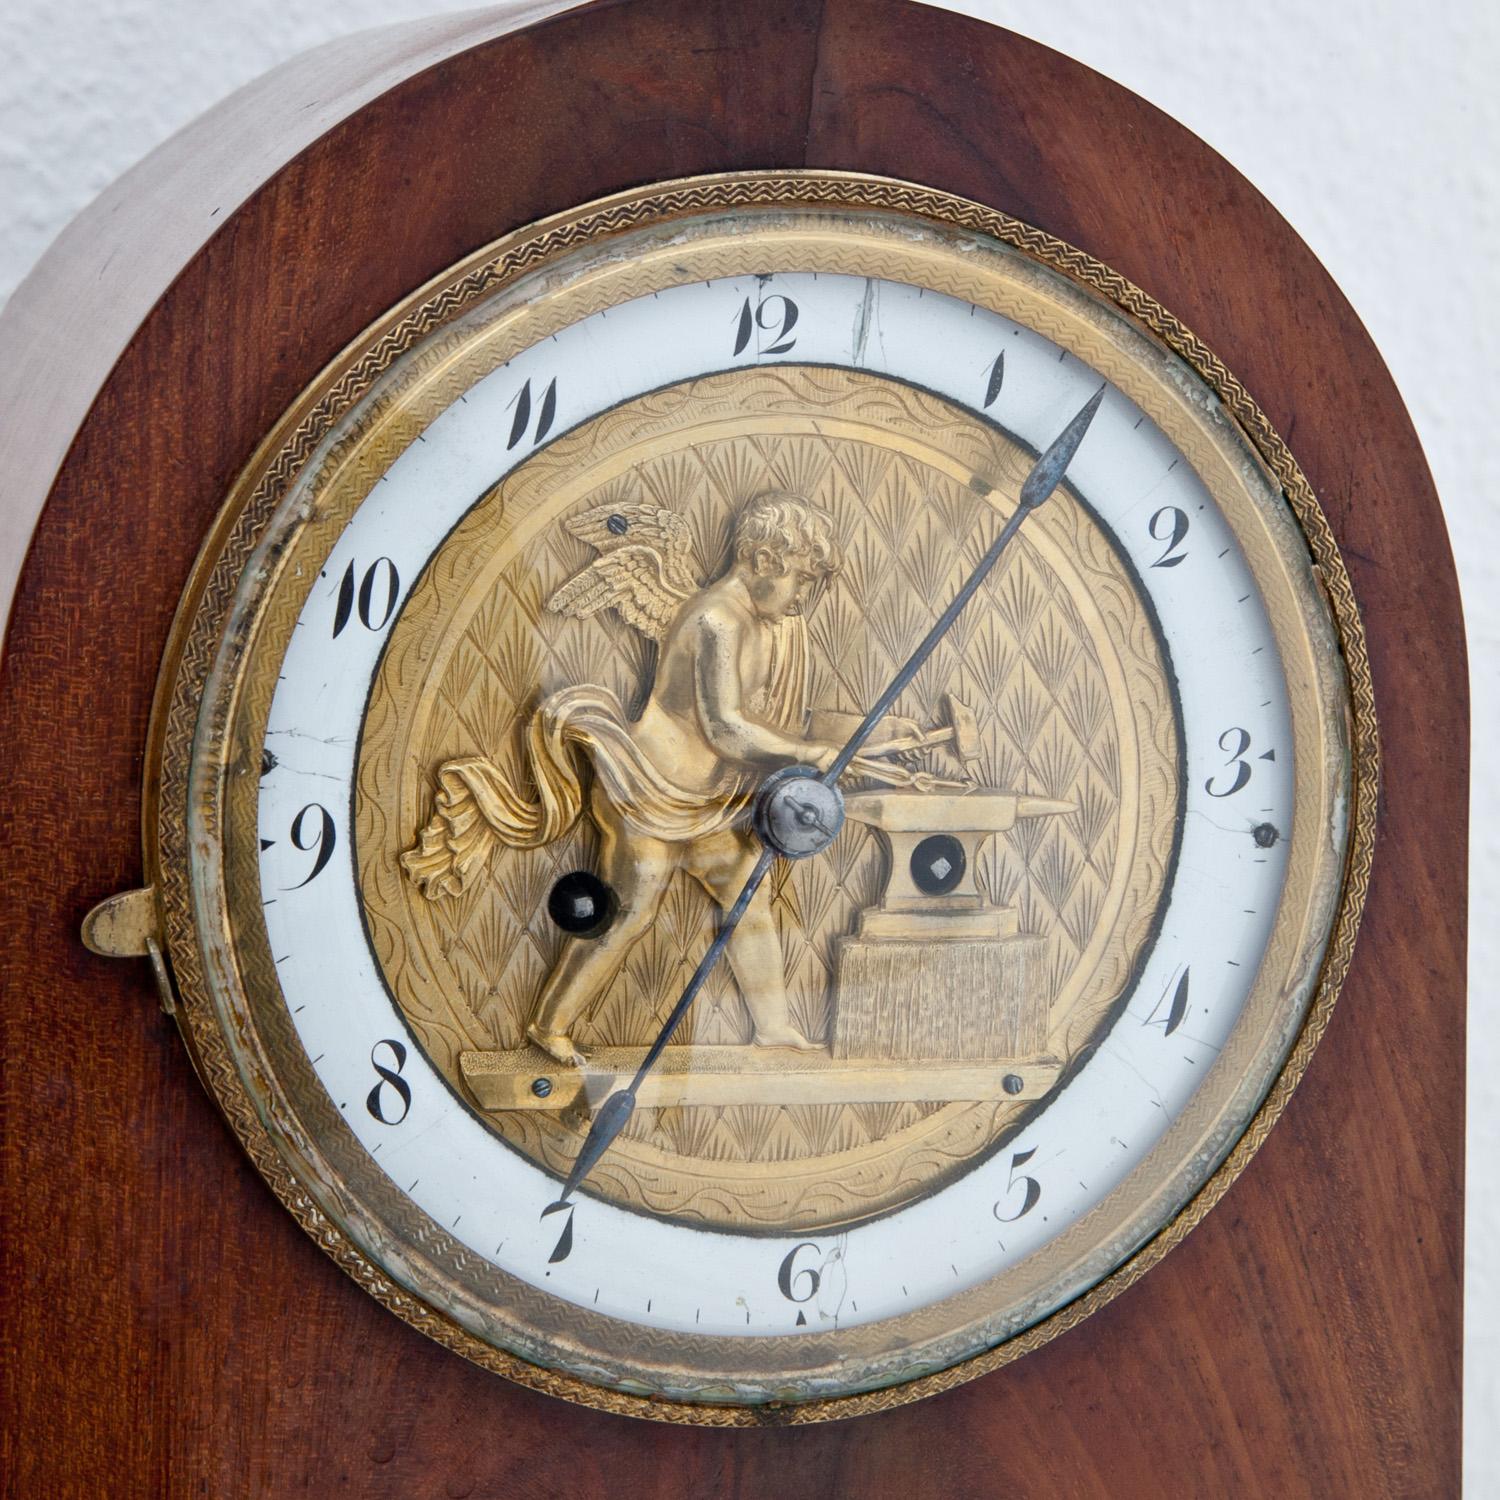 Biedermeier clock in a rounded mahogany case with an enamel ring with Arabic numerals and a bronze depiction of an angel with an anvil while forging. Underneath sun rays in a semi-circle on a black background.